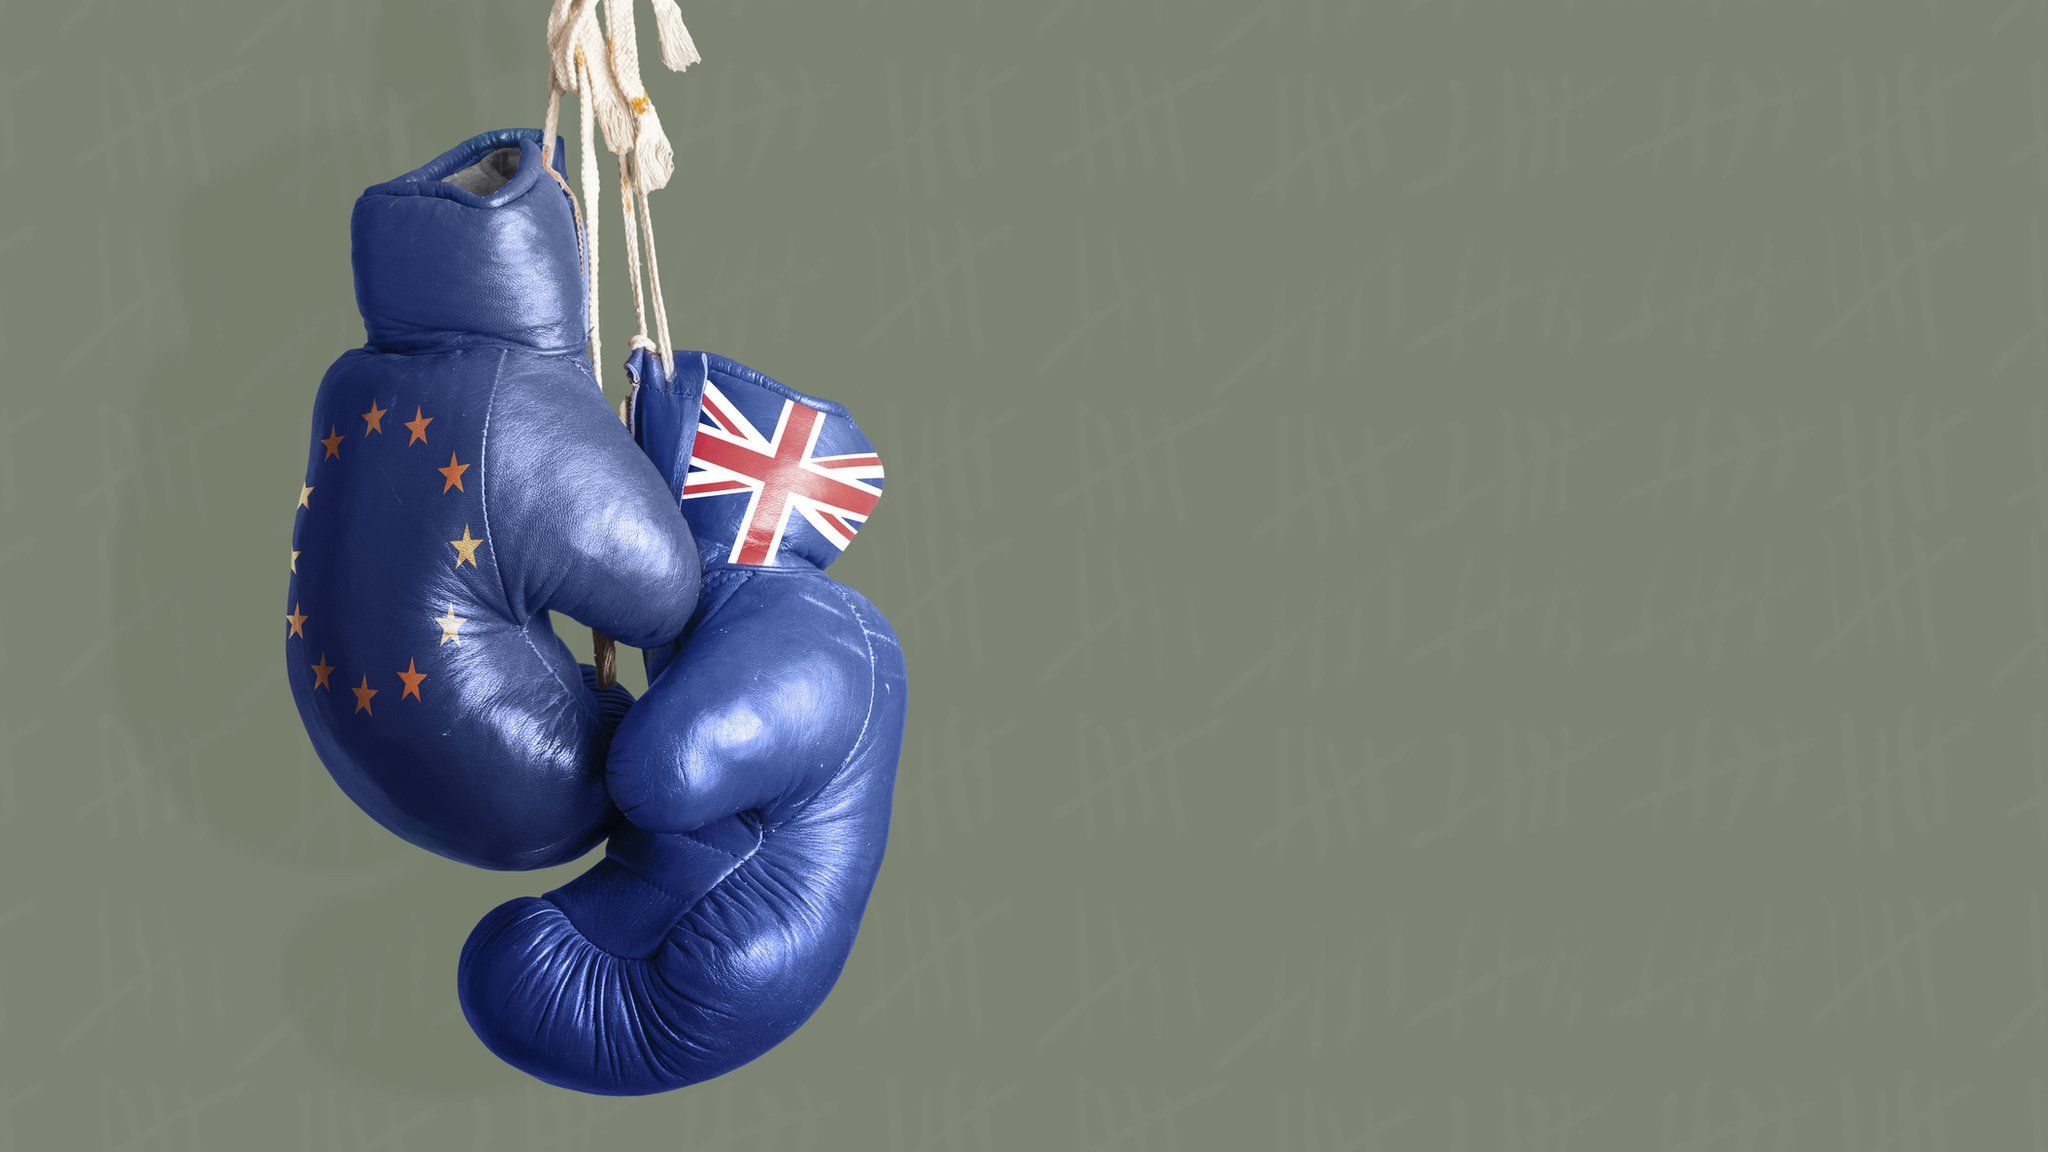 Boxing gloves with Union Jack and EU flag on them